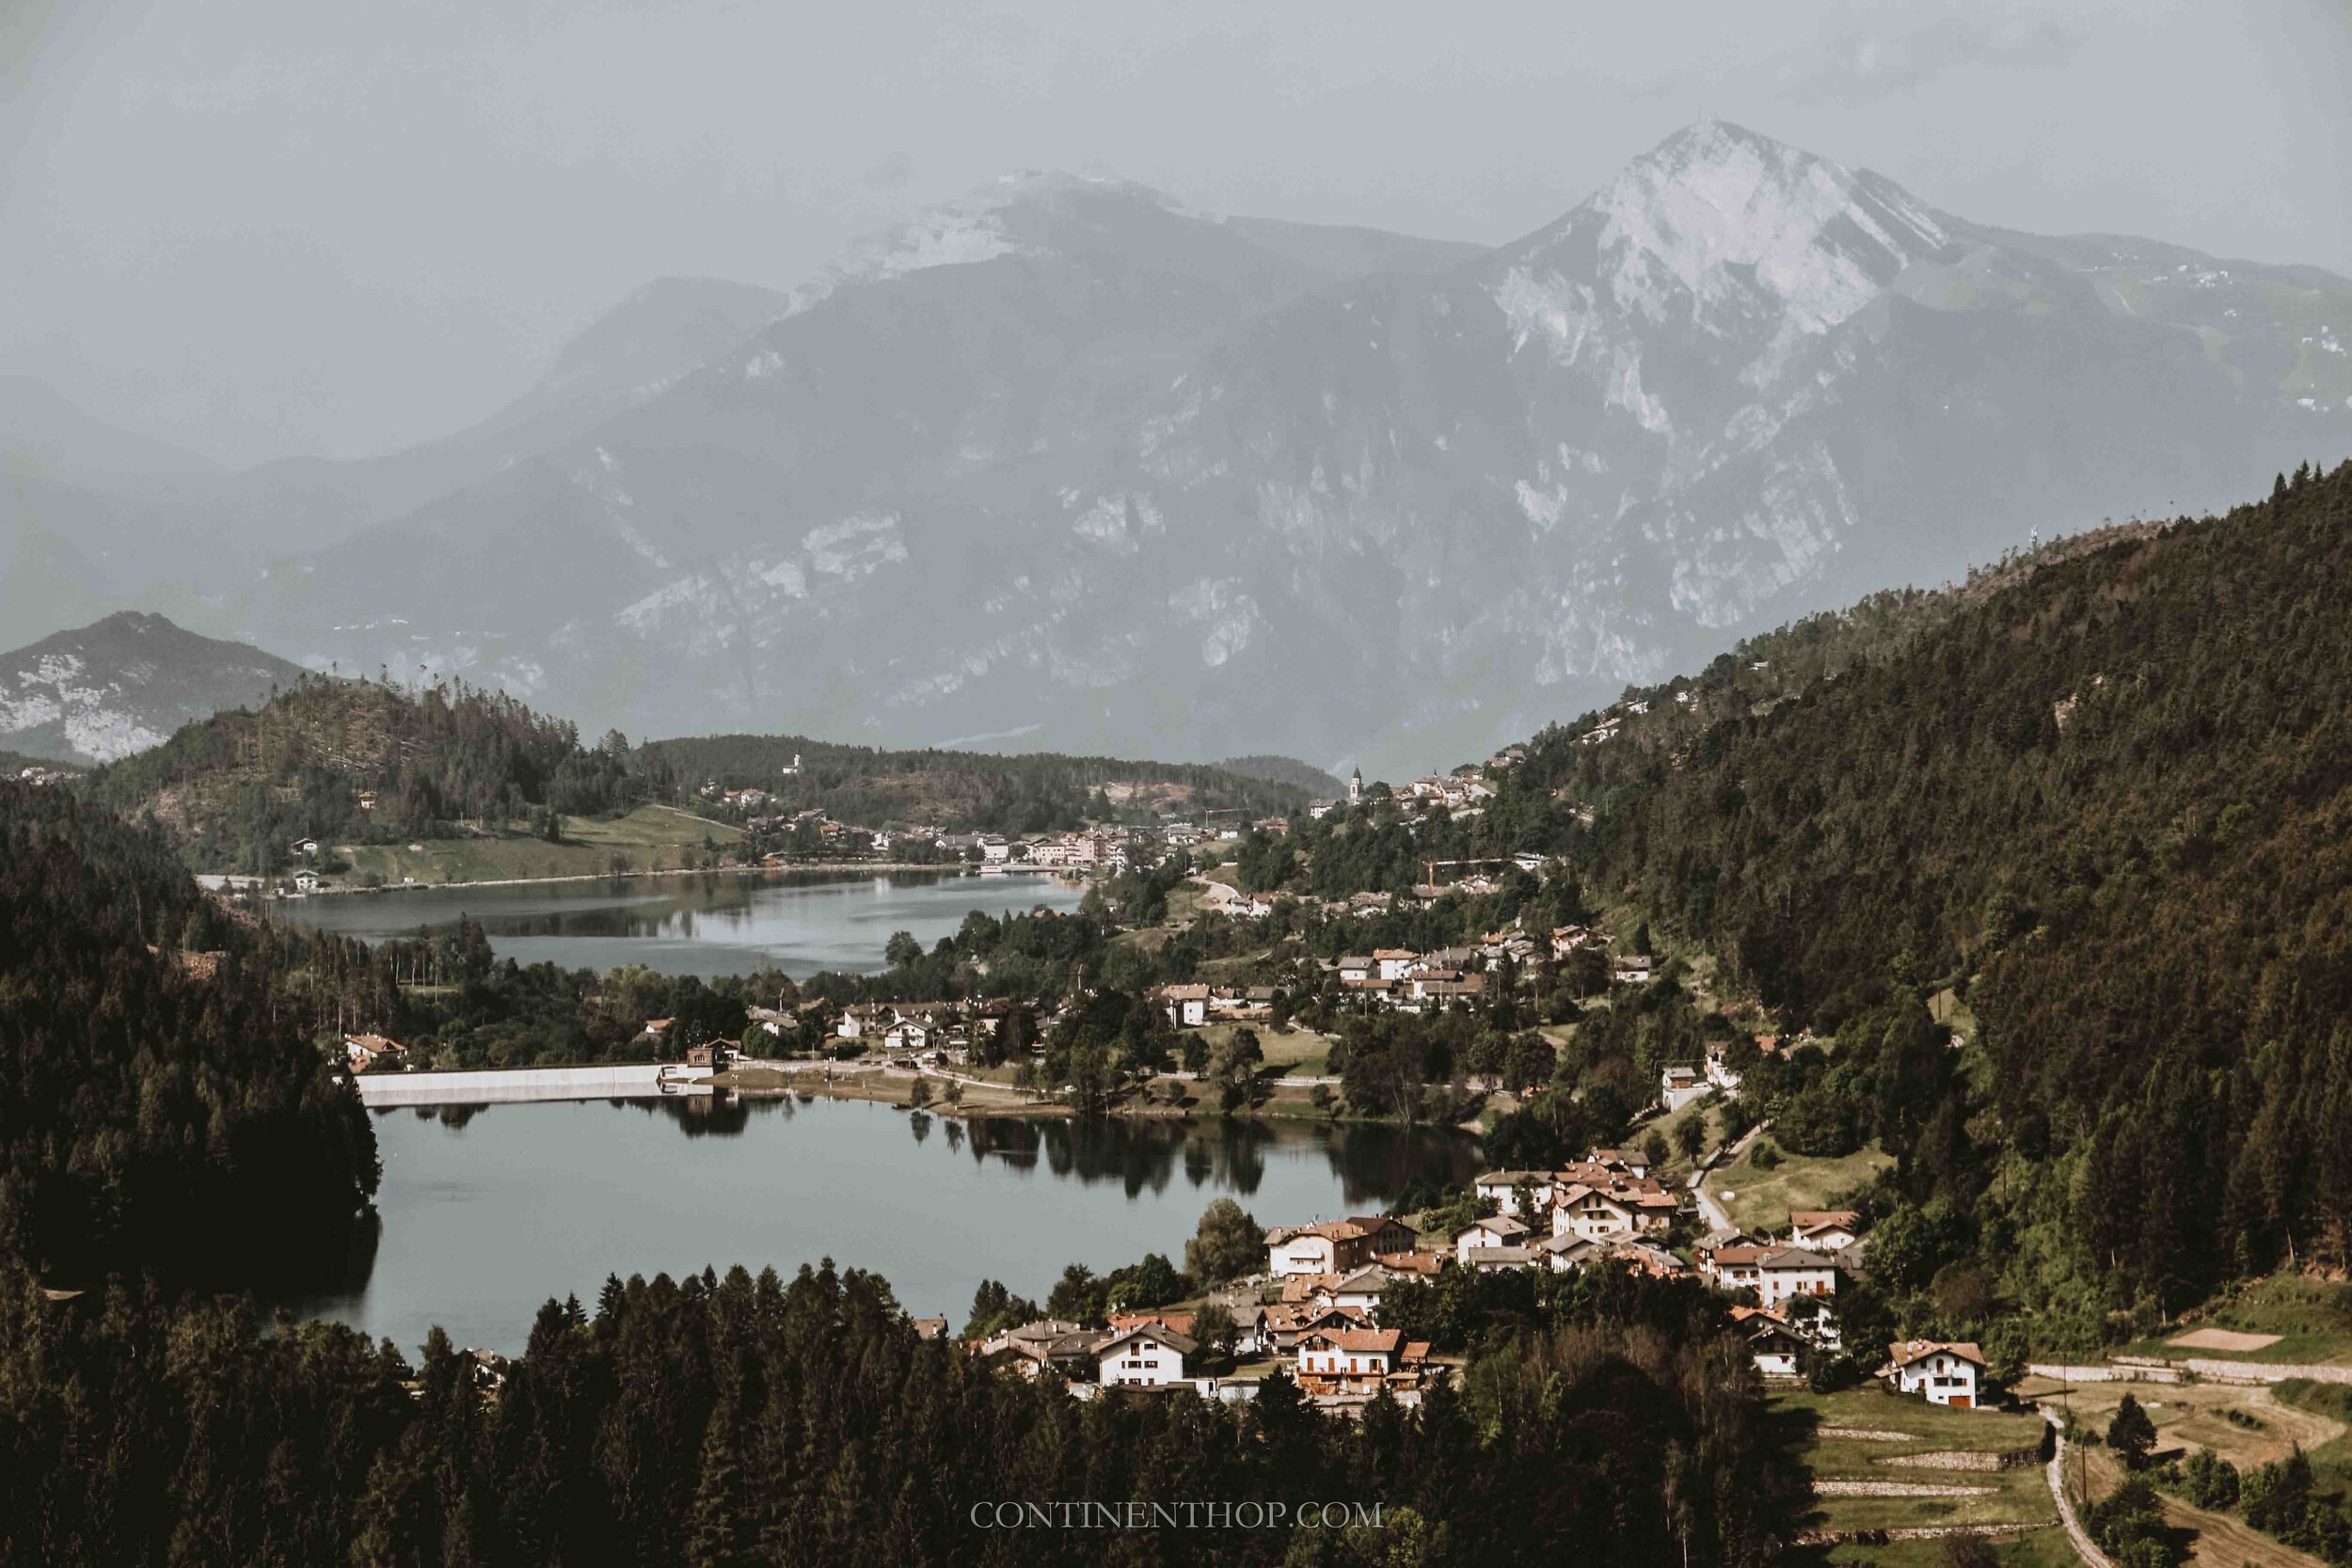 The view across Valle di Cembra that looks over Lago delle Piazze in Trentino